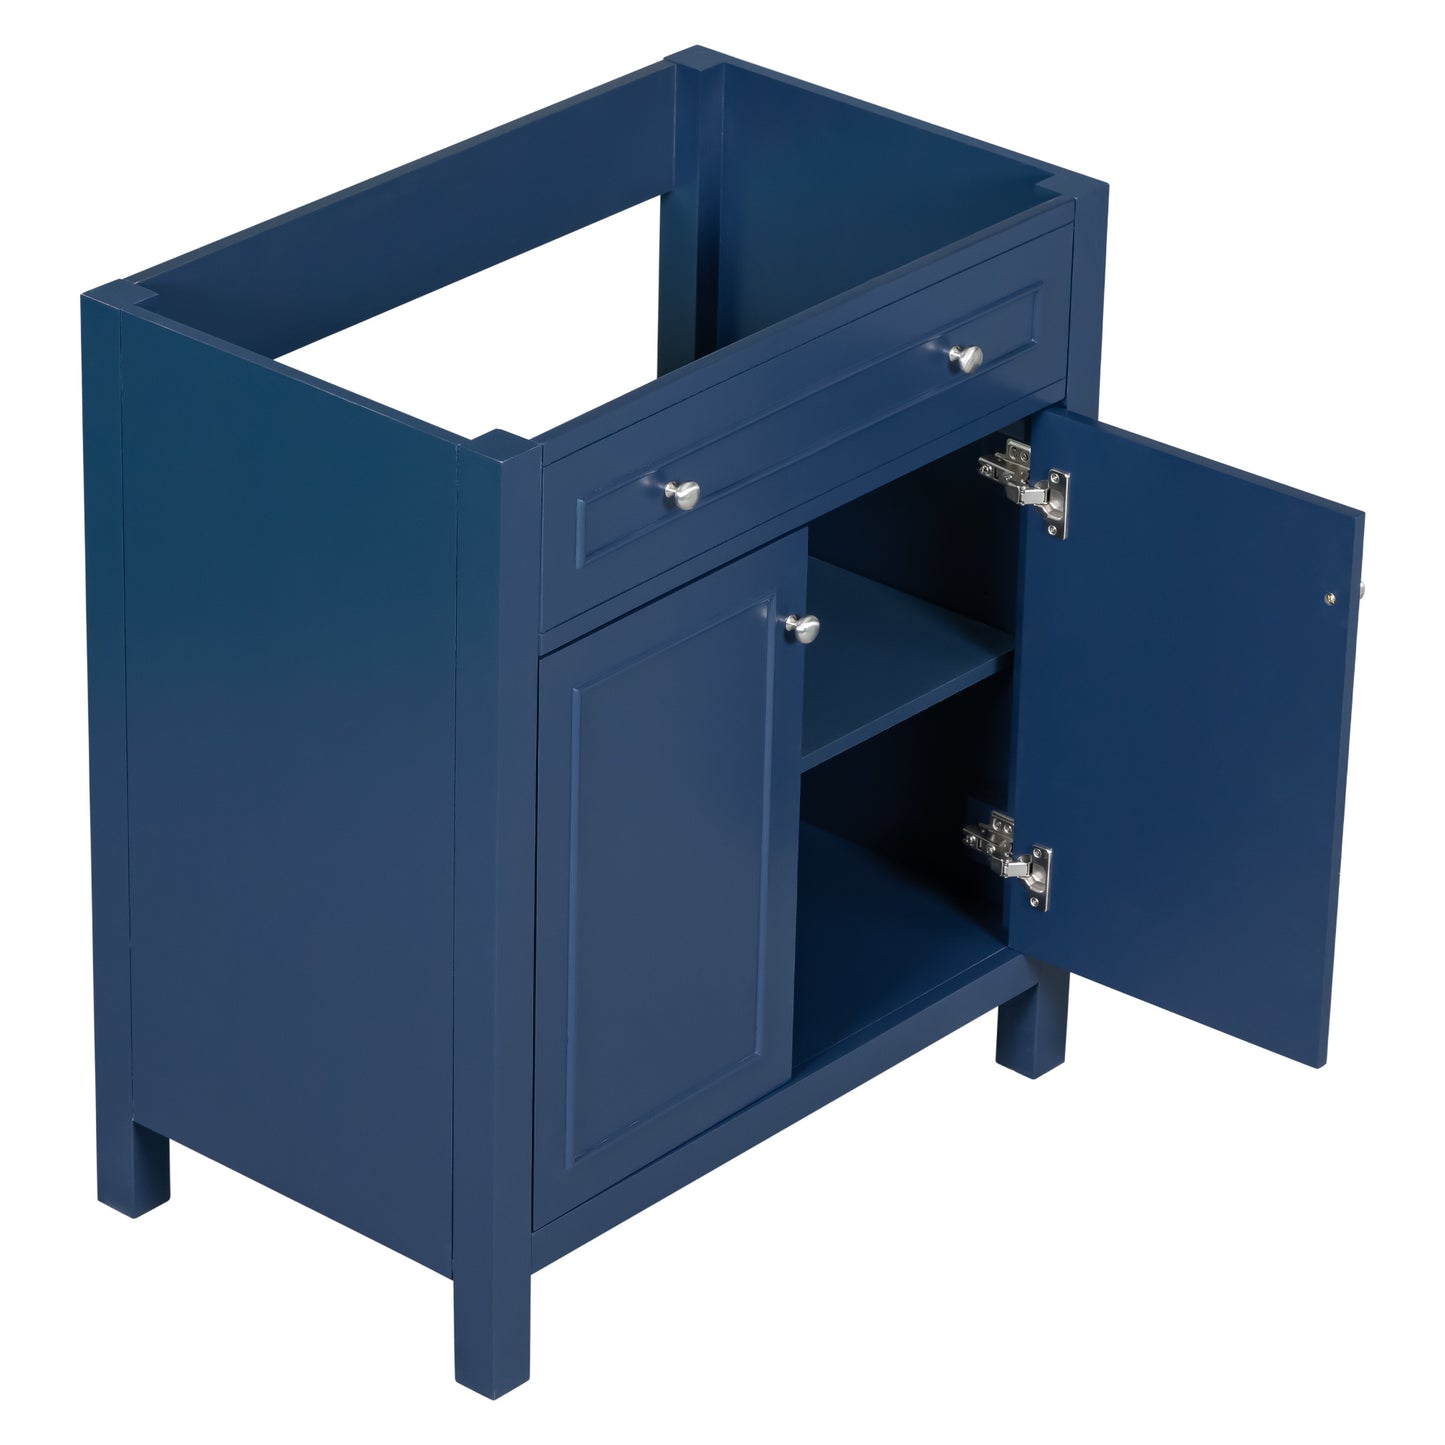 30" Bathroom Vanity without Sink Top, Cabinet Base Only, Bathroom Storage Cabinet with Two Doors and Adjustable Shelf, Blue